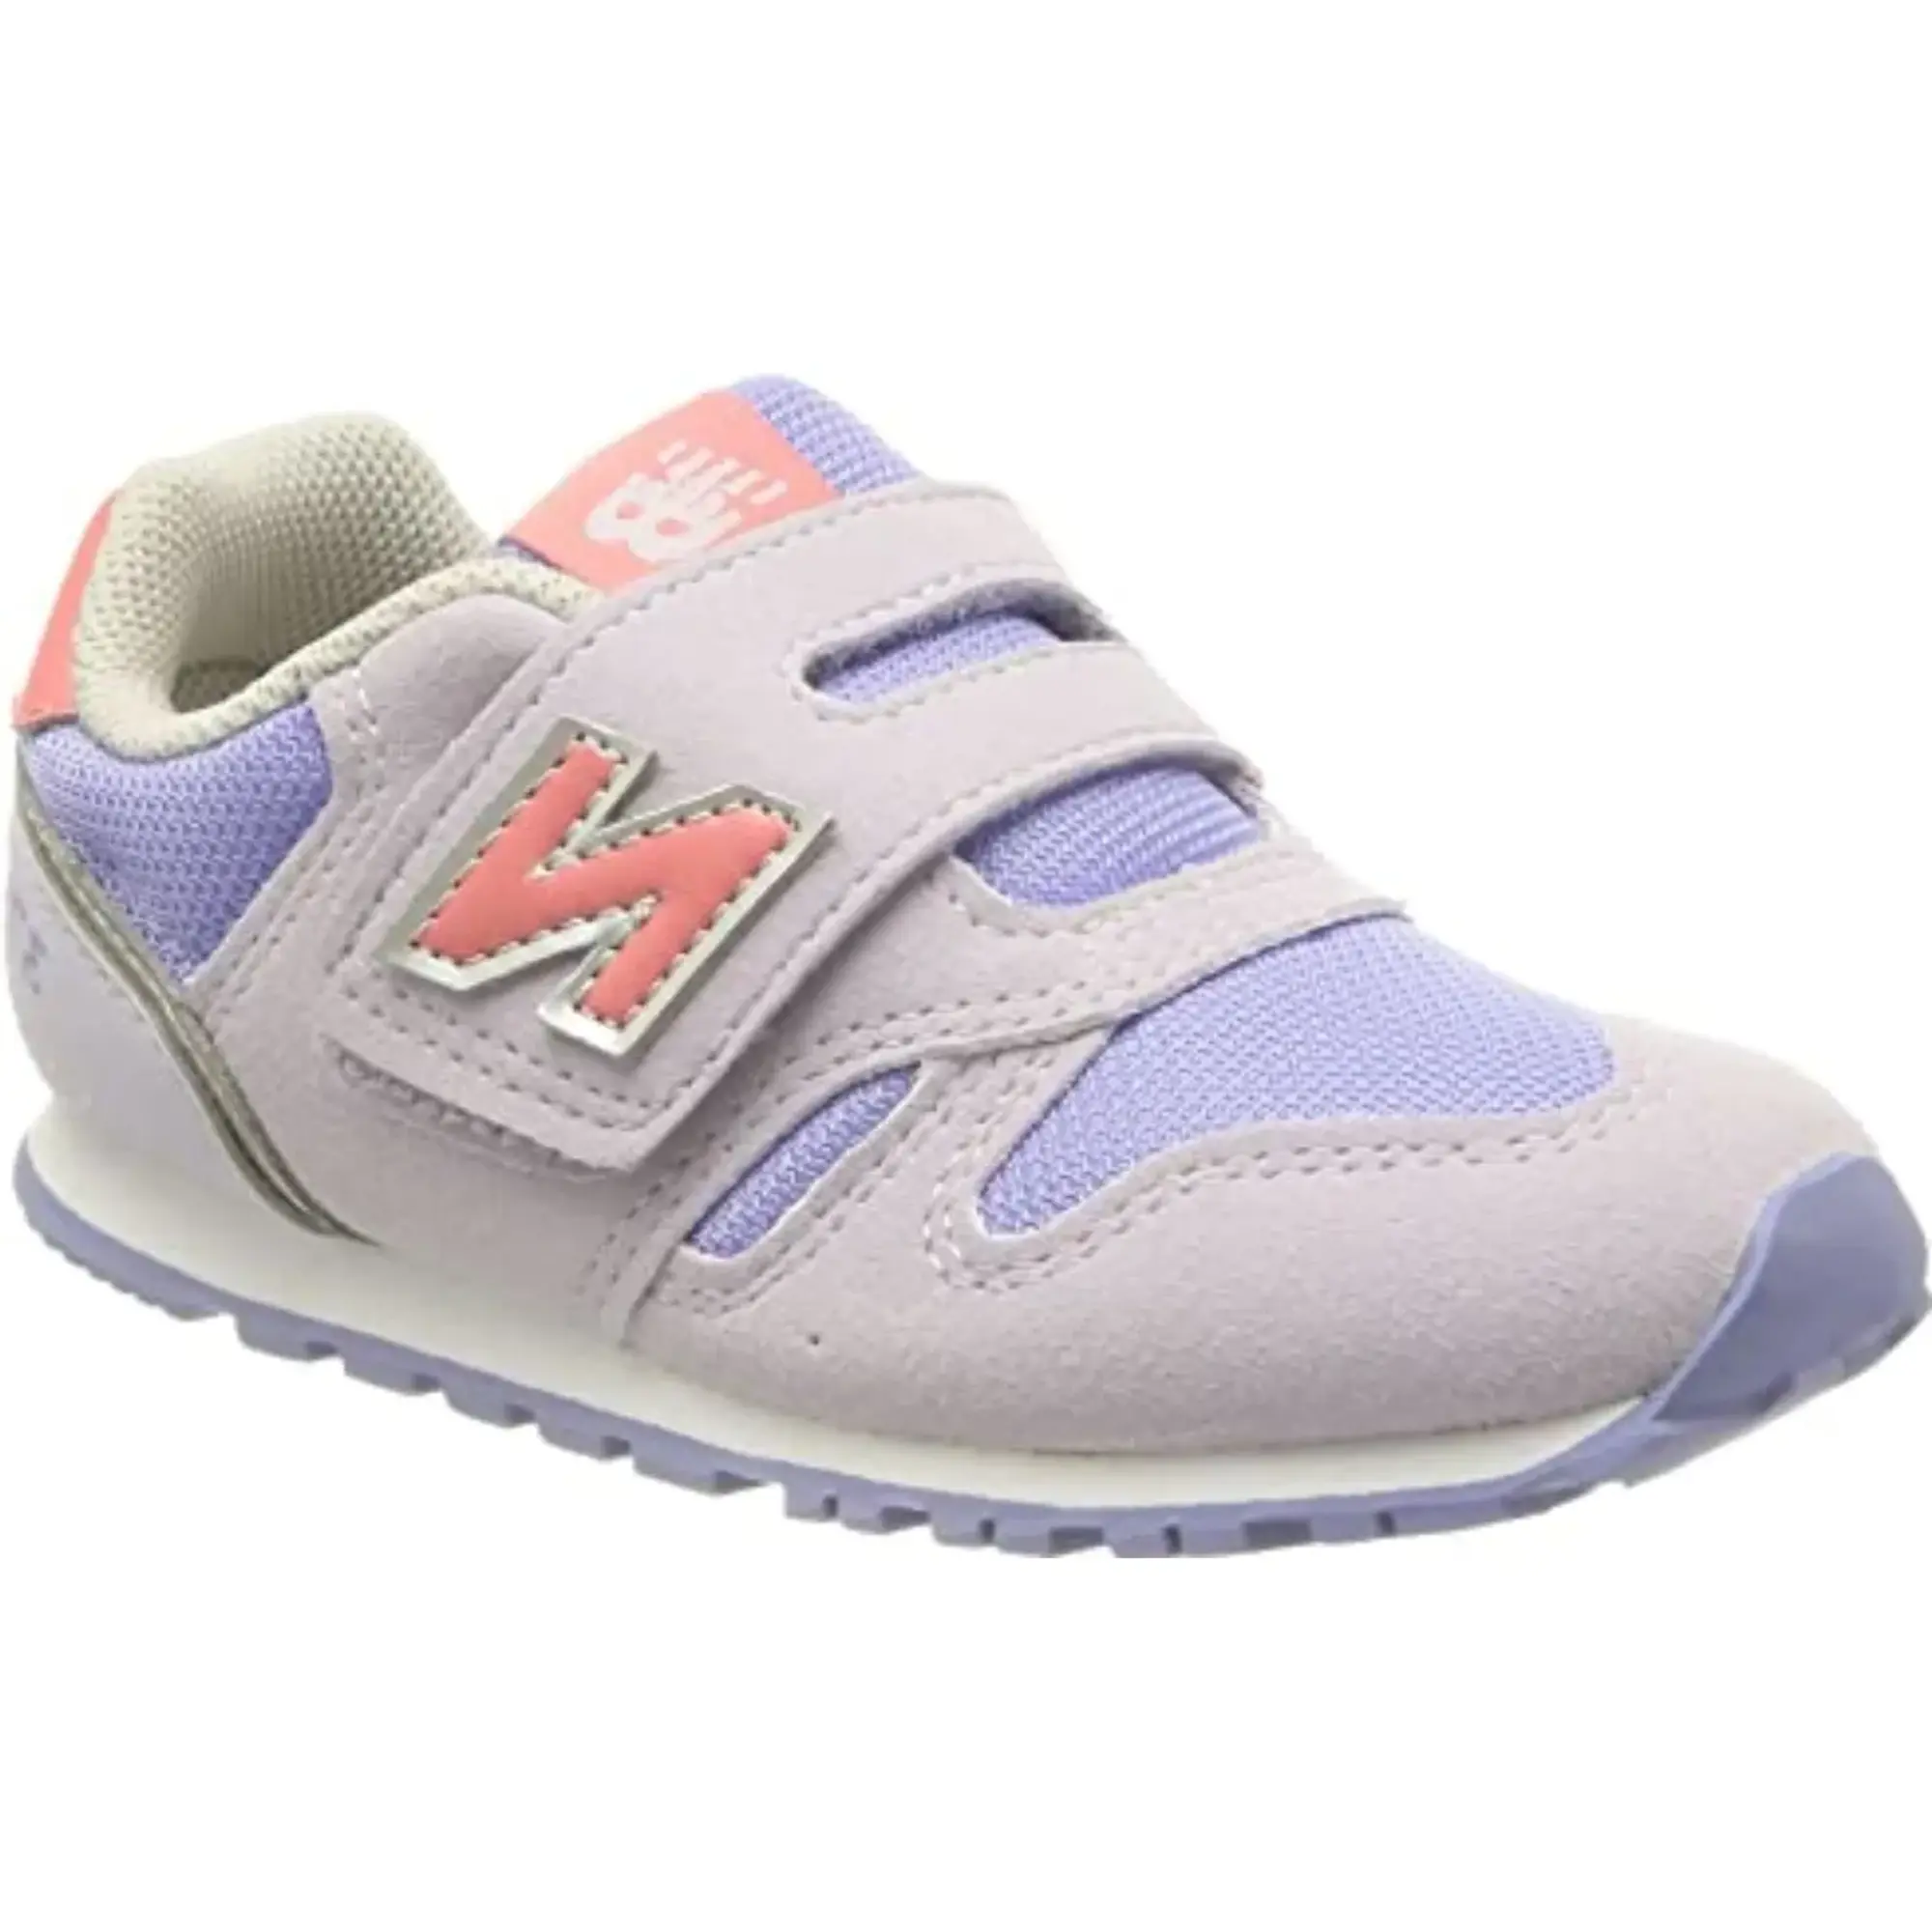 New Balance Girls Girl's 373 Hook and Loop Trainers in Violet Suede